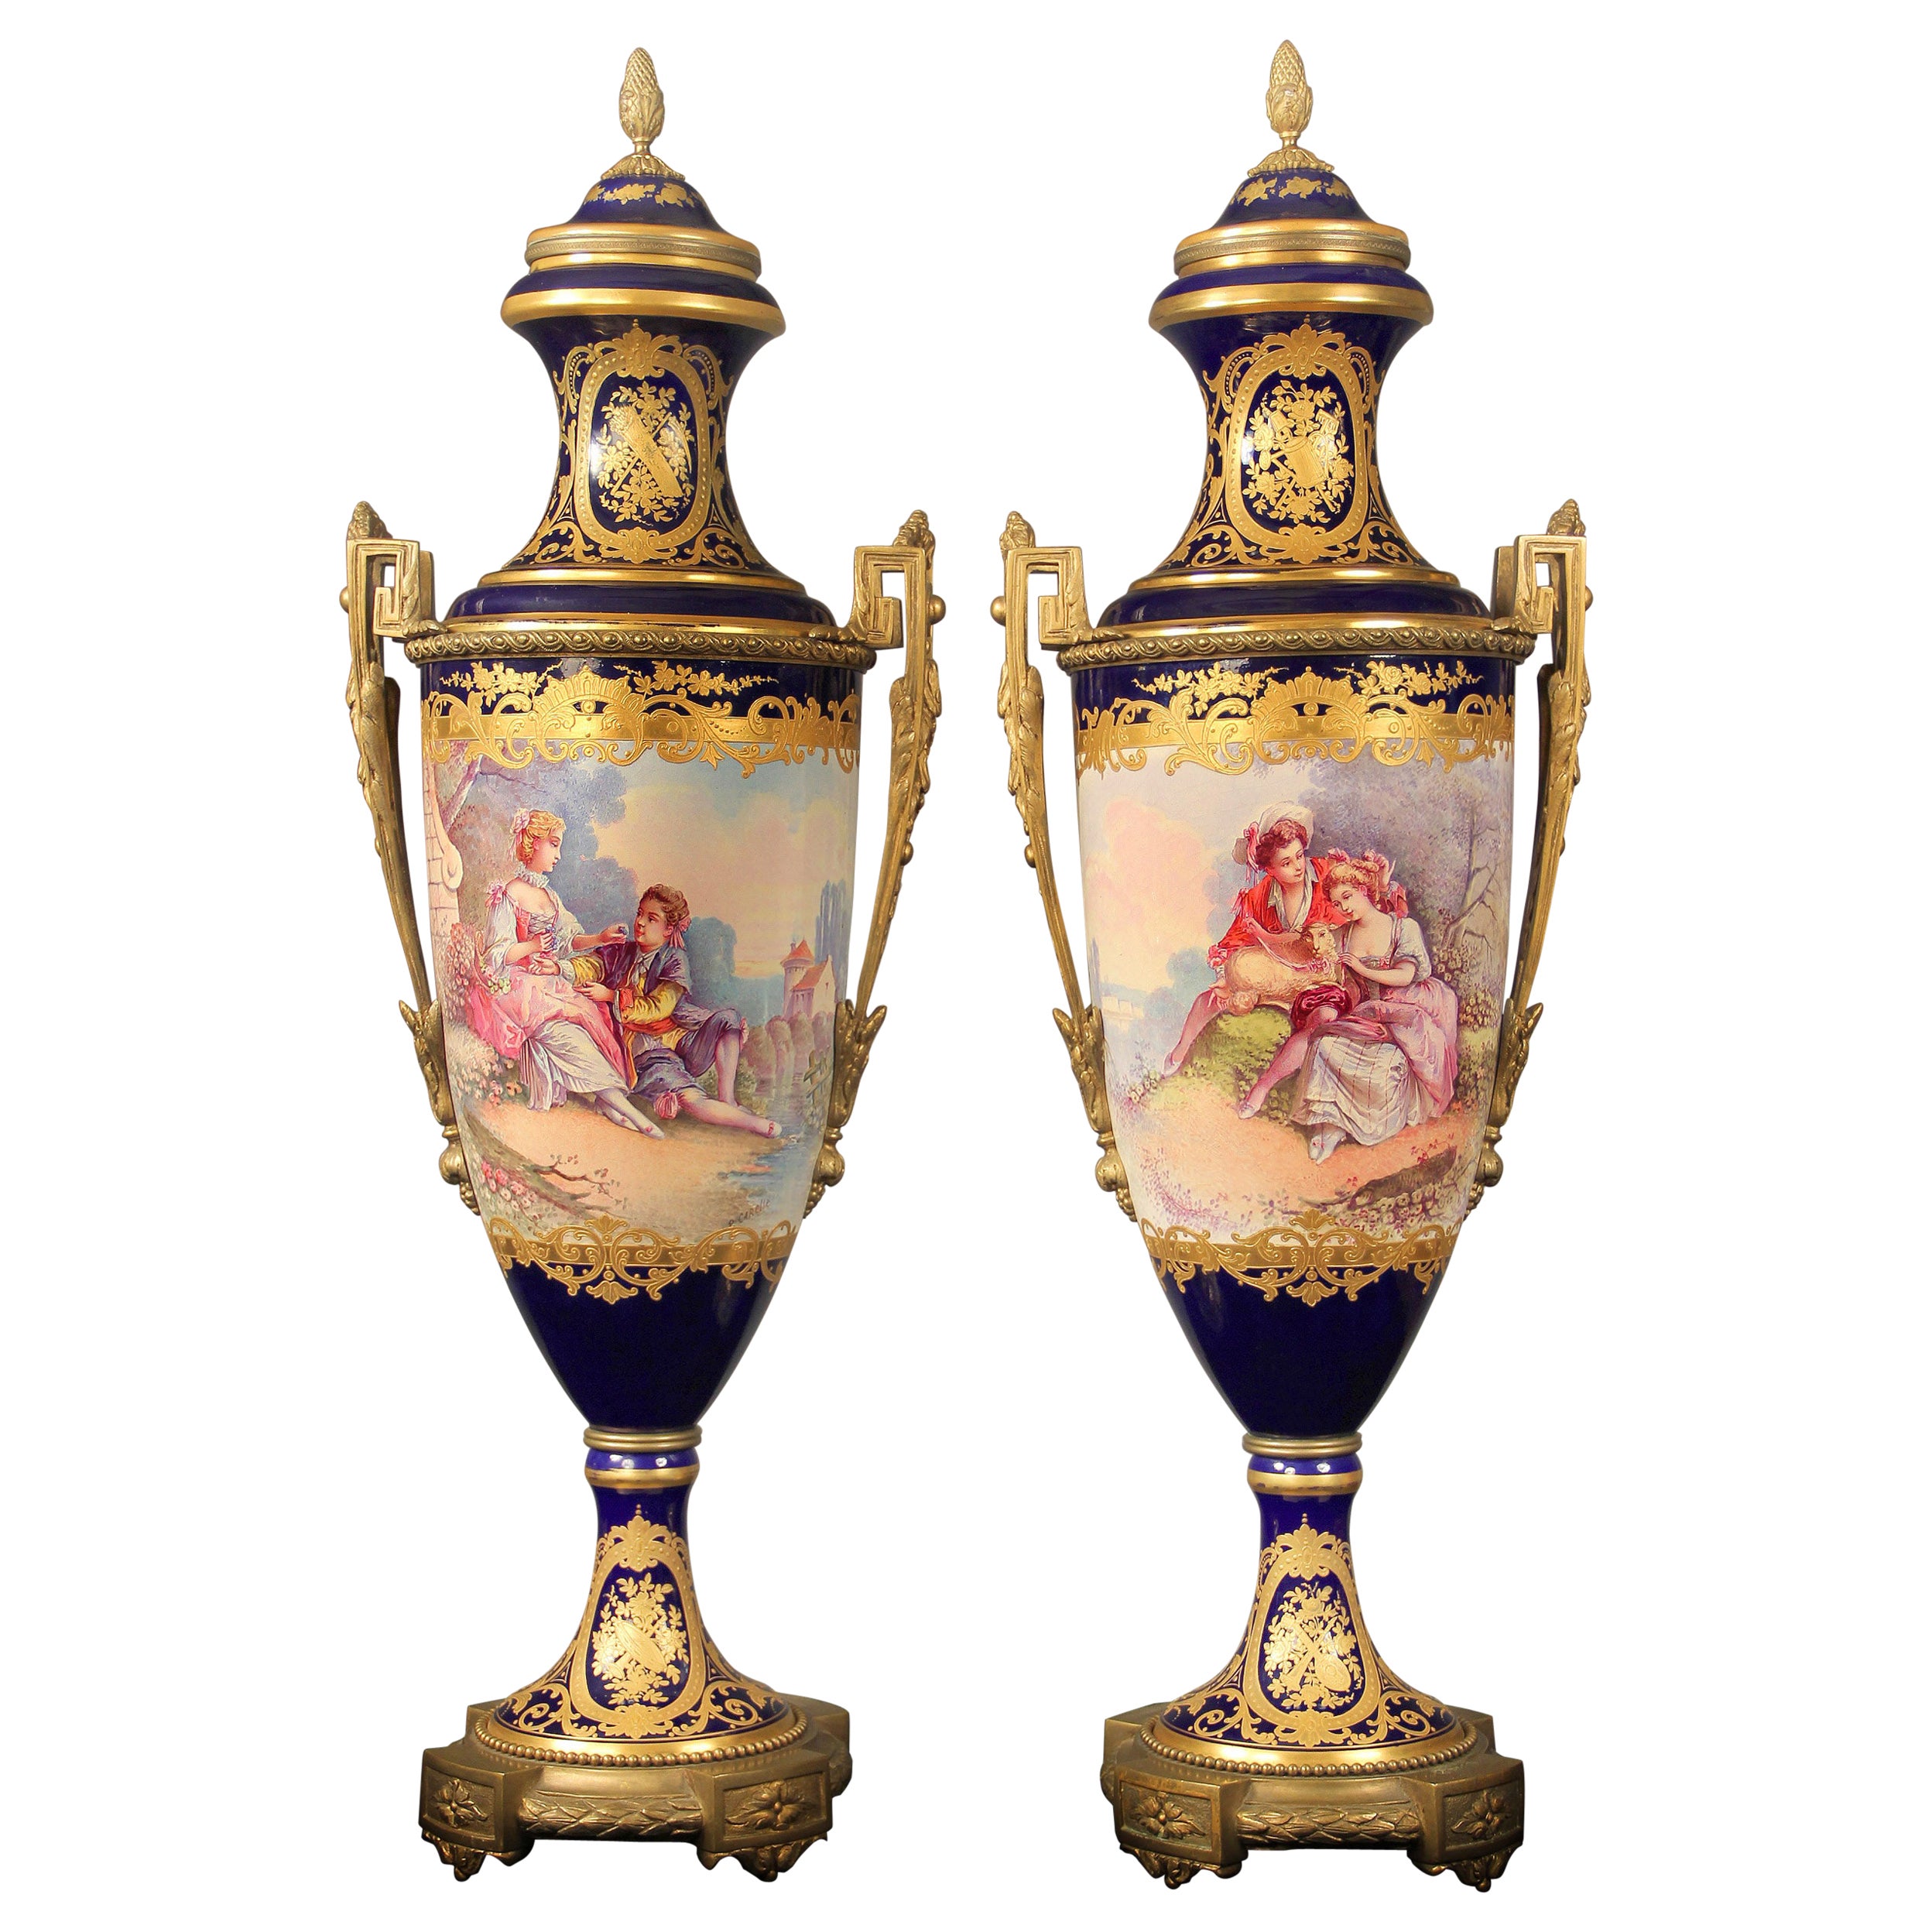 Palatial Pair Of Late 19th Century Bronze Mounted Sèvres Style Porcelain Vases For Sale At 1stdibs